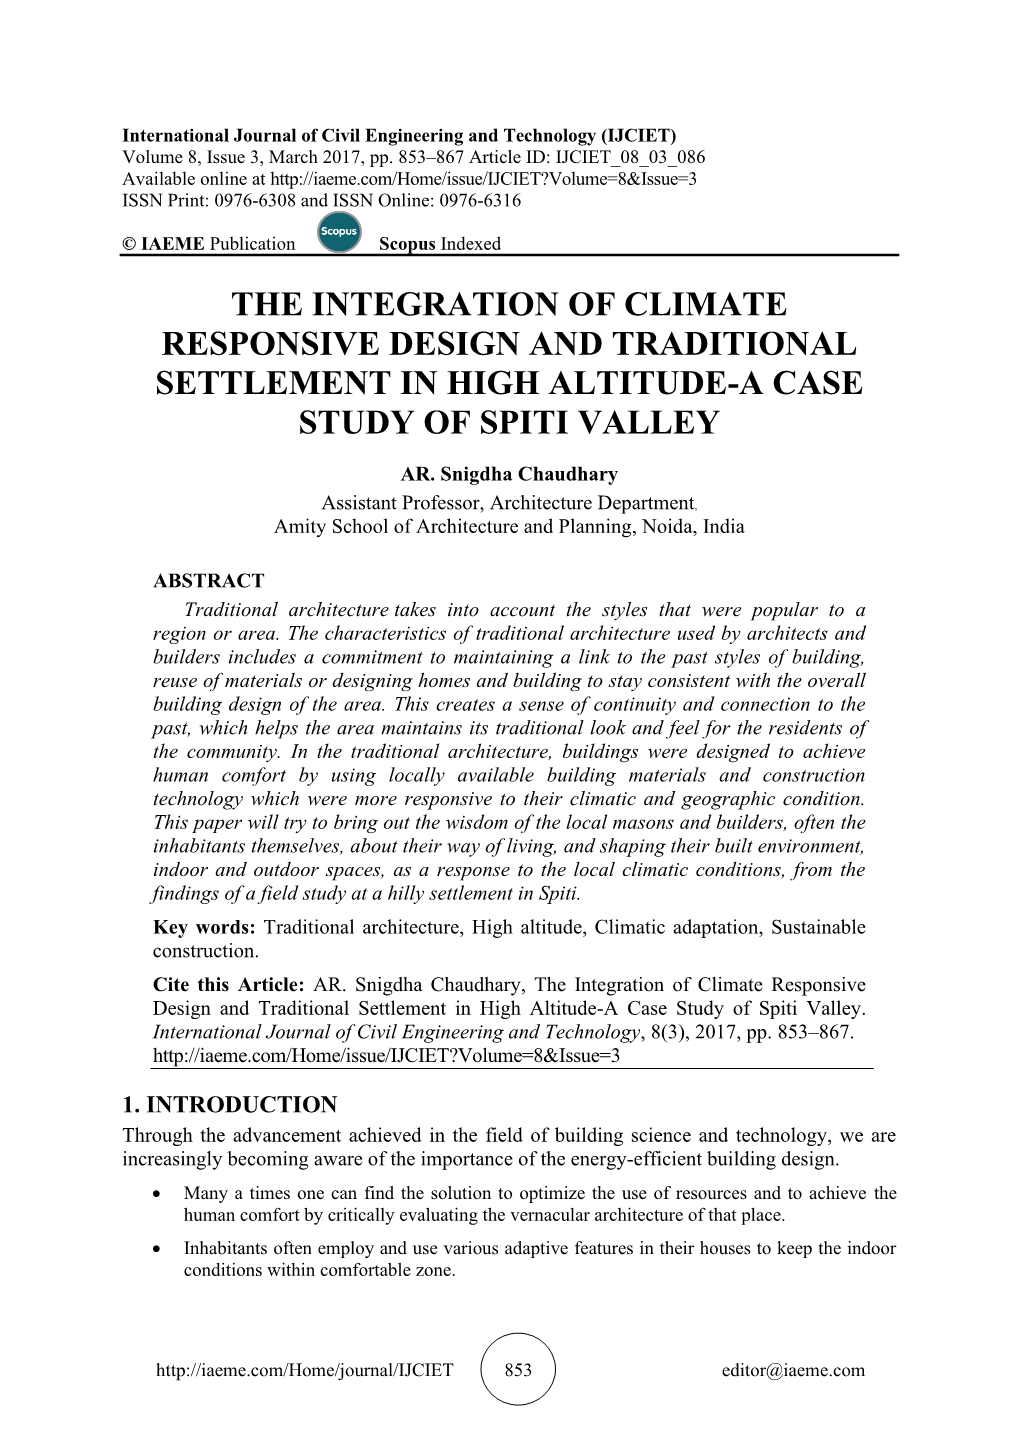 The Integration of Climate Responsive Design and Traditional Settlement in High Altitude-A Case Study of Spiti Valley